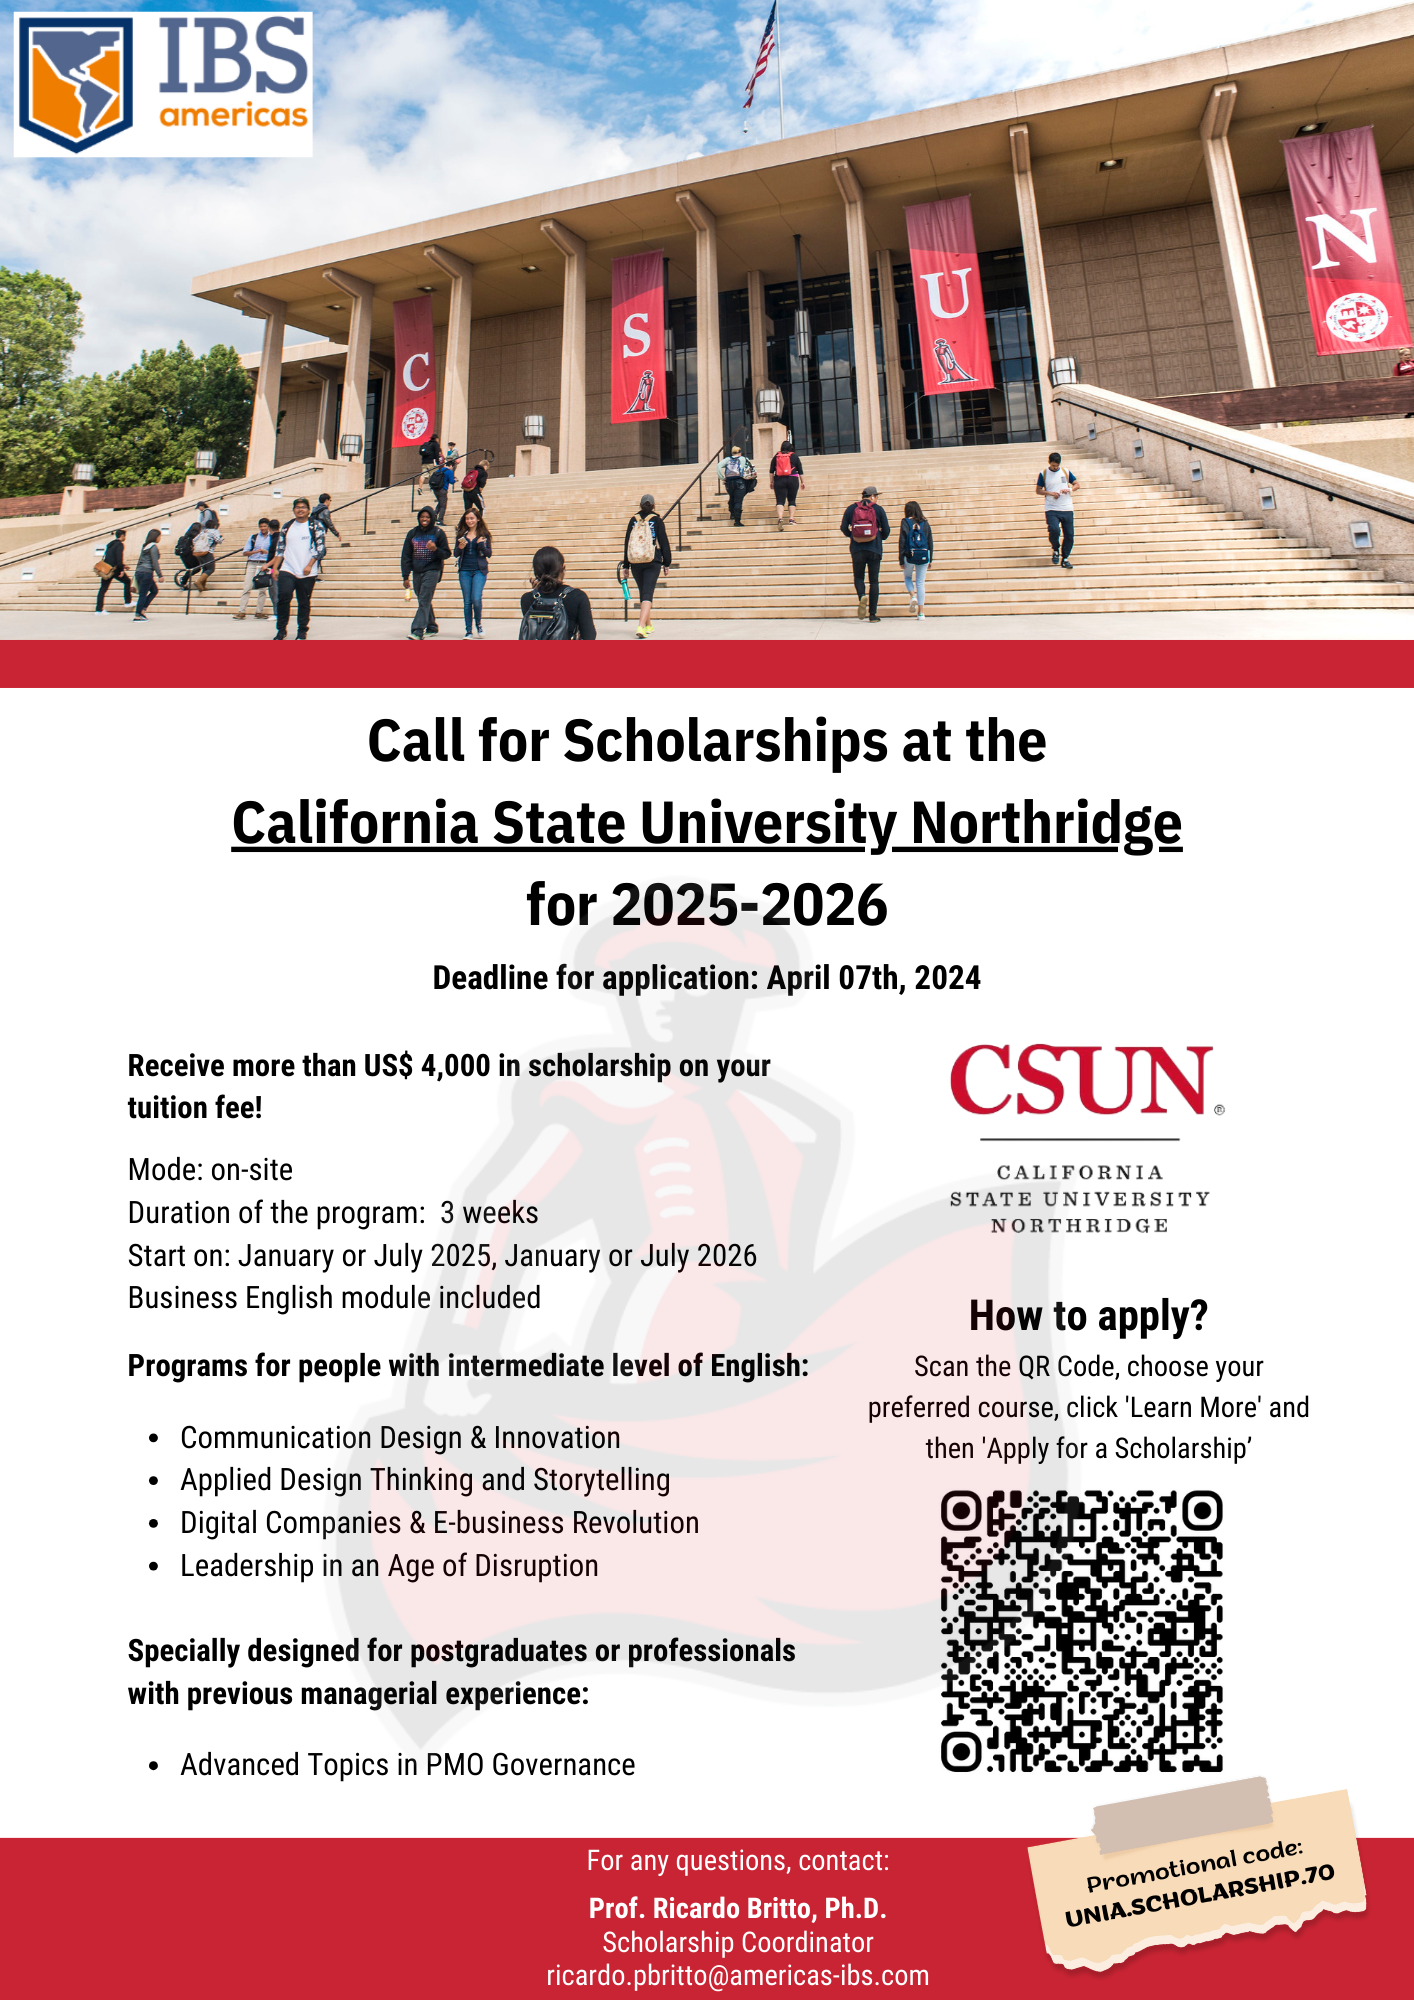 Call for Scholarships at the California State University Northridge 2025-2026